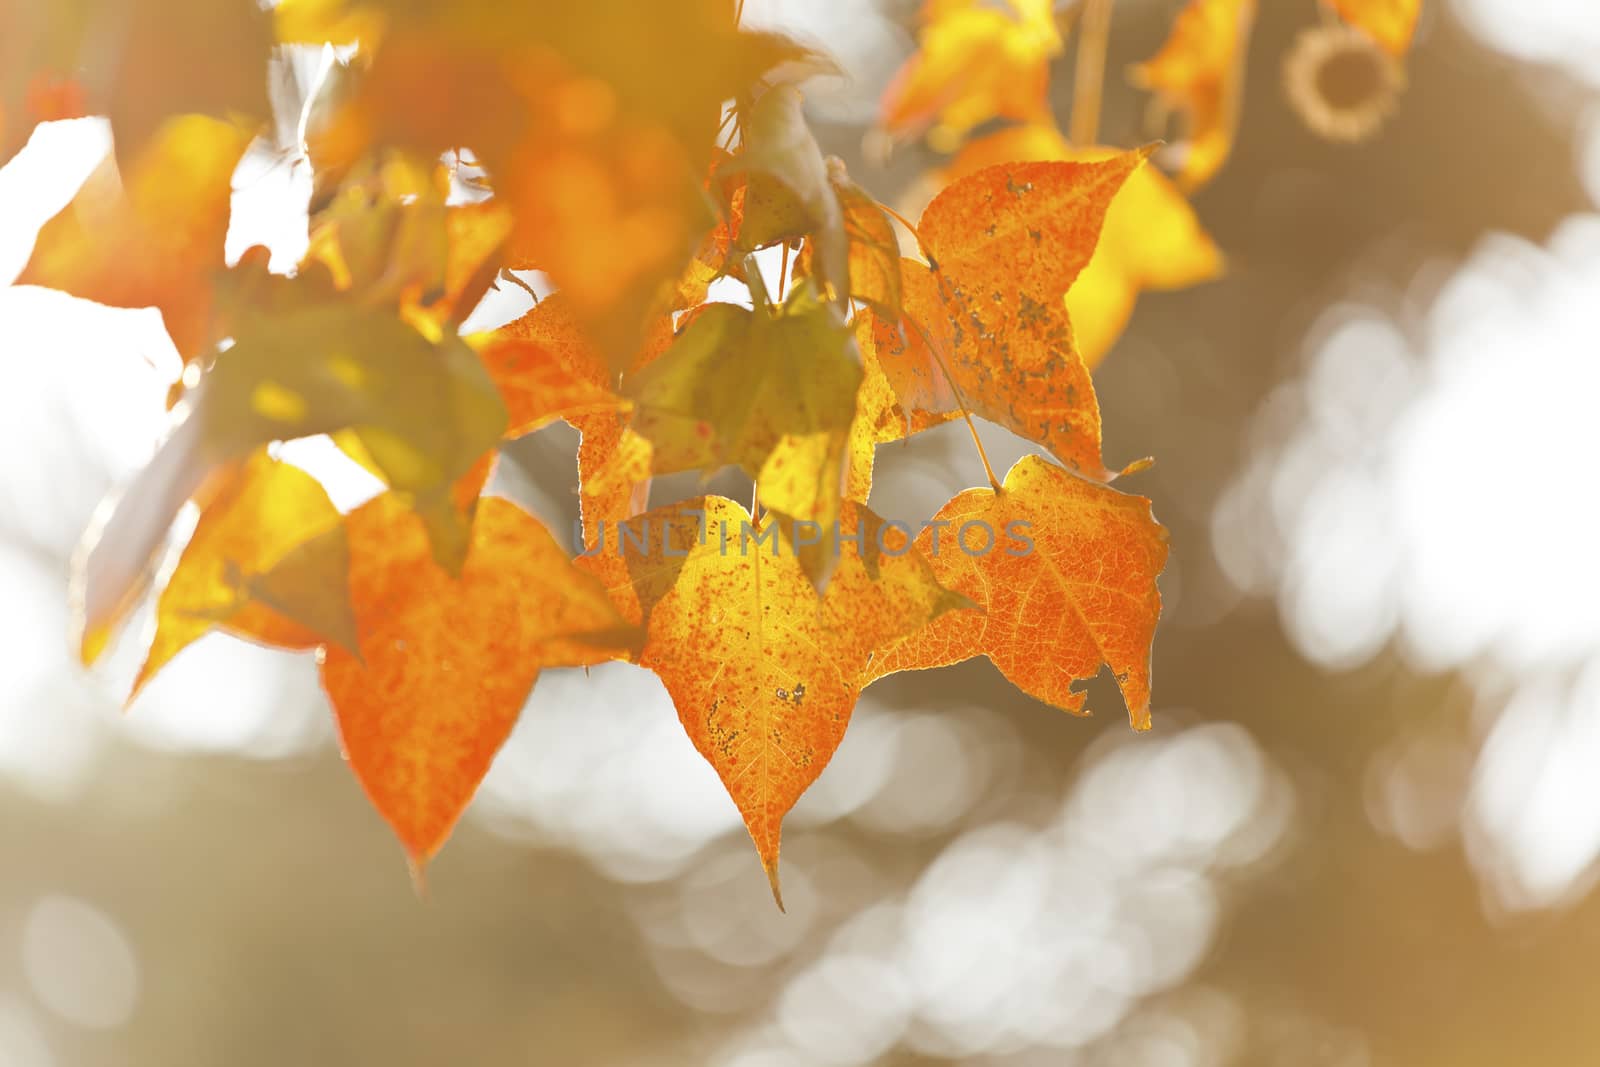 Autumn leaves under sunlight by kawing921